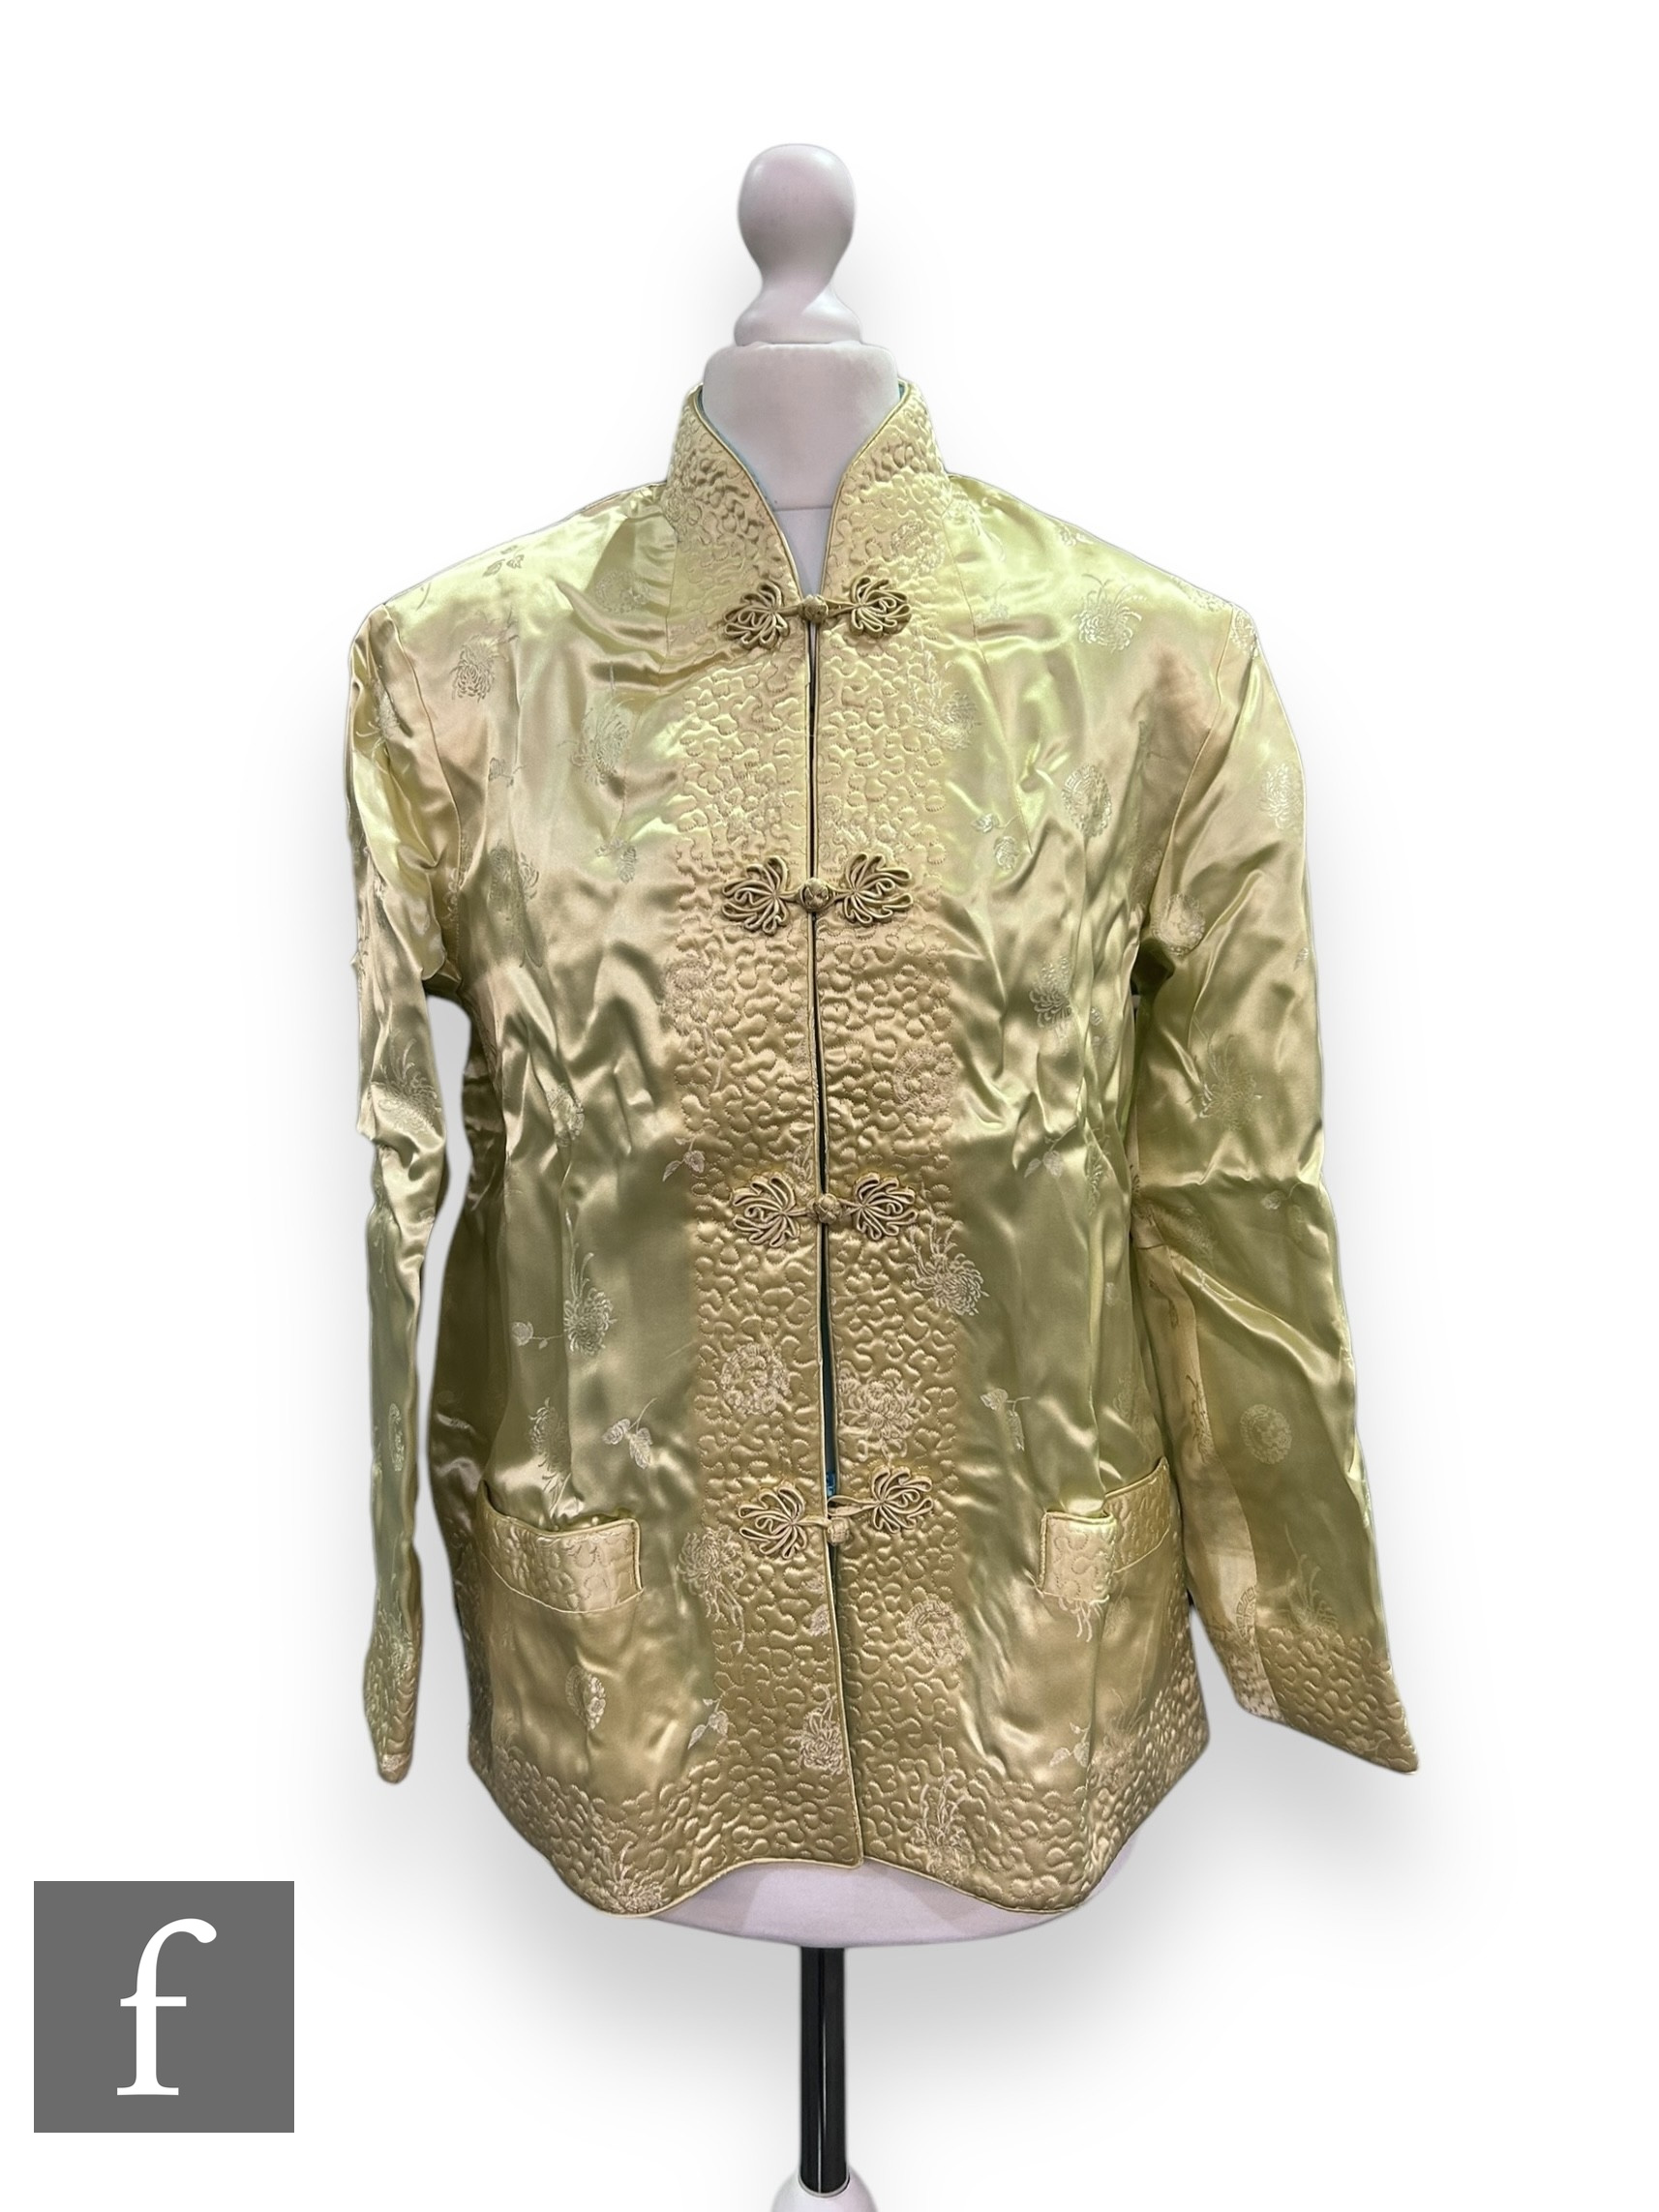 A 1950s Peony Brand lady's Chinese style reversible jacket with floral sprays in pale yellow and